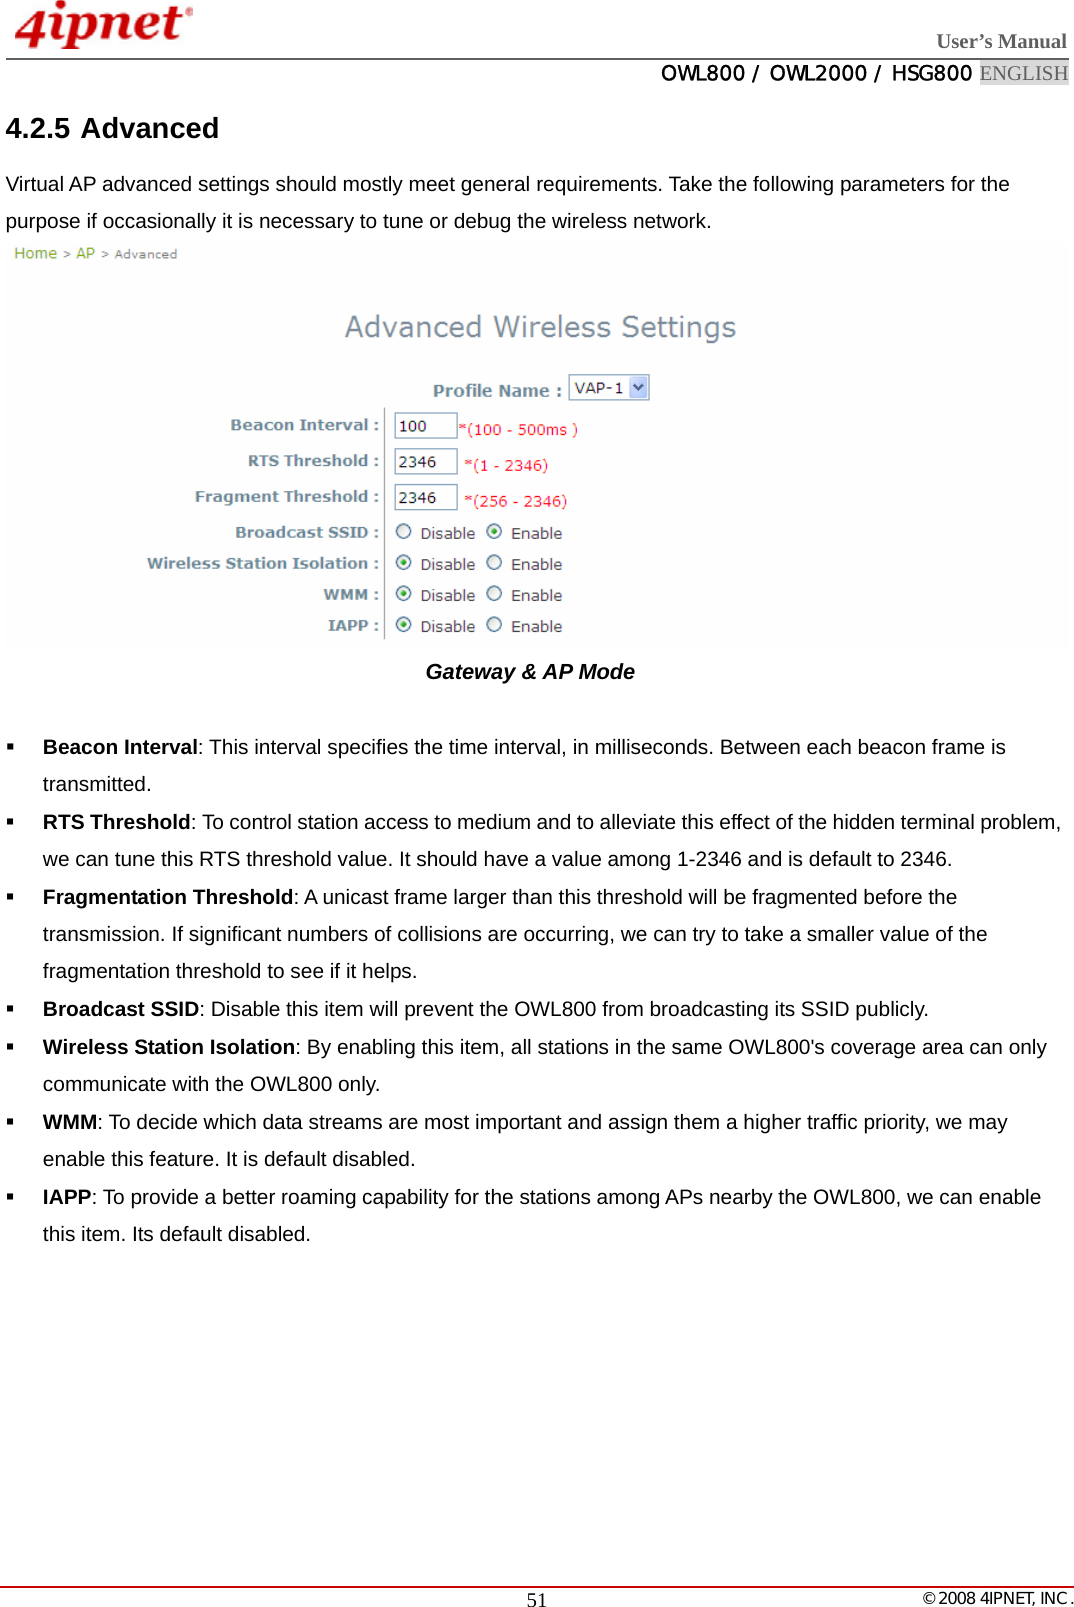  User’s Manual  OWL800 / OWL2000 / HSG800 ENGLISH   © 2008 4IPNET, INC.  514.2.5 Advanced  Virtual AP advanced settings should mostly meet general requirements. Take the following parameters for the purpose if occasionally it is necessary to tune or debug the wireless network.  Gateway &amp; AP Mode   Beacon Interval: This interval specifies the time interval, in milliseconds. Between each beacon frame is transmitted.   RTS Threshold: To control station access to medium and to alleviate this effect of the hidden terminal problem, we can tune this RTS threshold value. It should have a value among 1-2346 and is default to 2346.    Fragmentation Threshold: A unicast frame larger than this threshold will be fragmented before the transmission. If significant numbers of collisions are occurring, we can try to take a smaller value of the fragmentation threshold to see if it helps.    Broadcast SSID: Disable this item will prevent the OWL800 from broadcasting its SSID publicly.    Wireless Station Isolation: By enabling this item, all stations in the same OWL800&apos;s coverage area can only communicate with the OWL800 only.    WMM: To decide which data streams are most important and assign them a higher traffic priority, we may enable this feature. It is default disabled.    IAPP: To provide a better roaming capability for the stations among APs nearby the OWL800, we can enable this item. Its default disabled.  